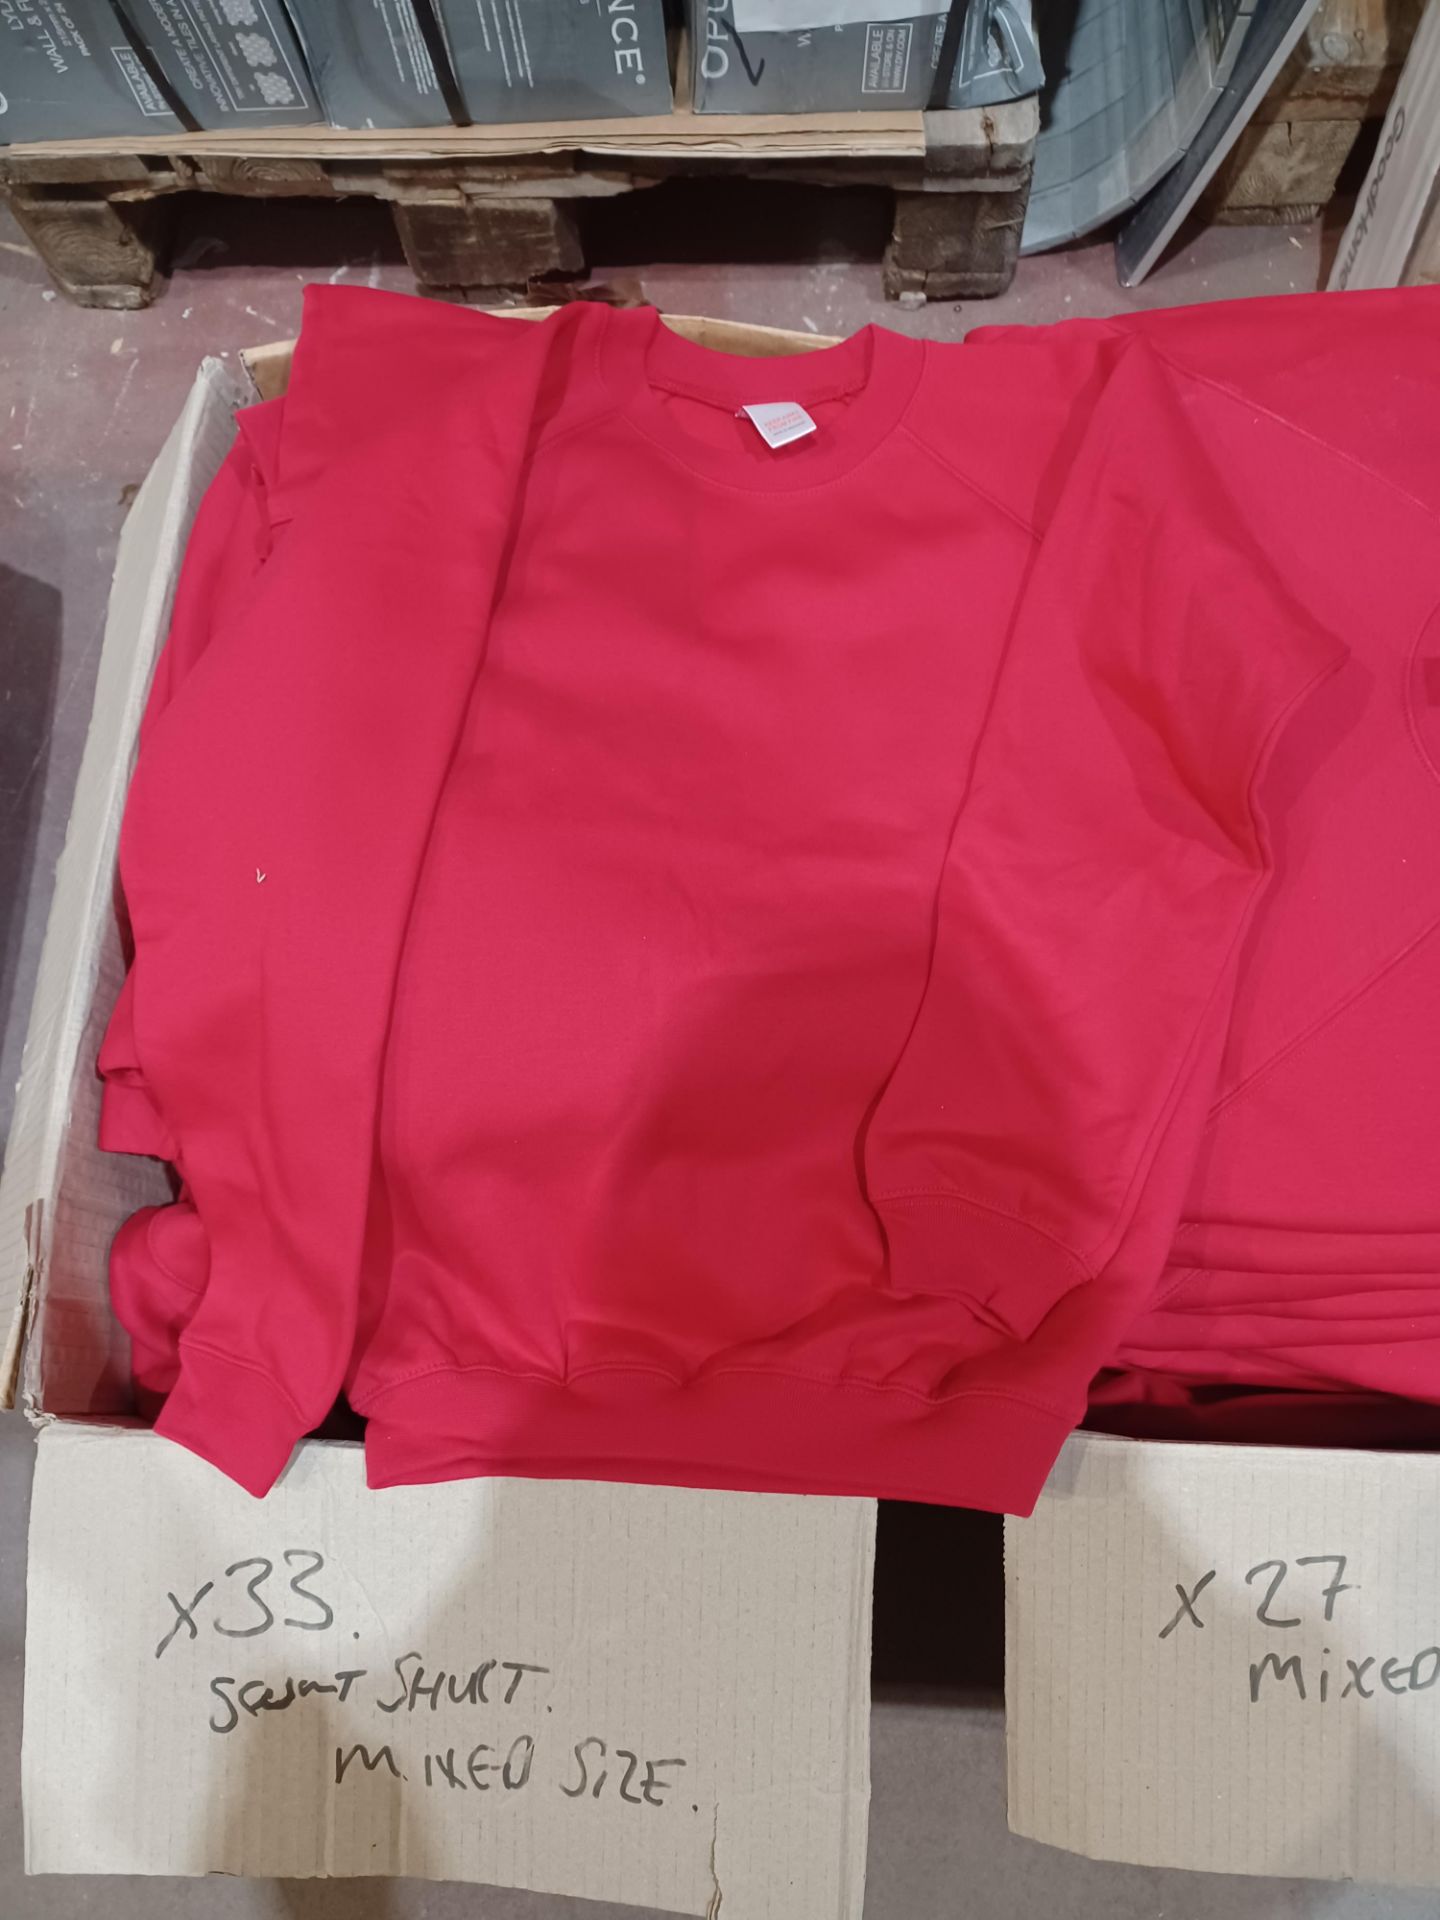 33 x Soft Cotton Fleeced Premium Swearshirts in Red in mixed sizes . RRP £19.81 each - R14